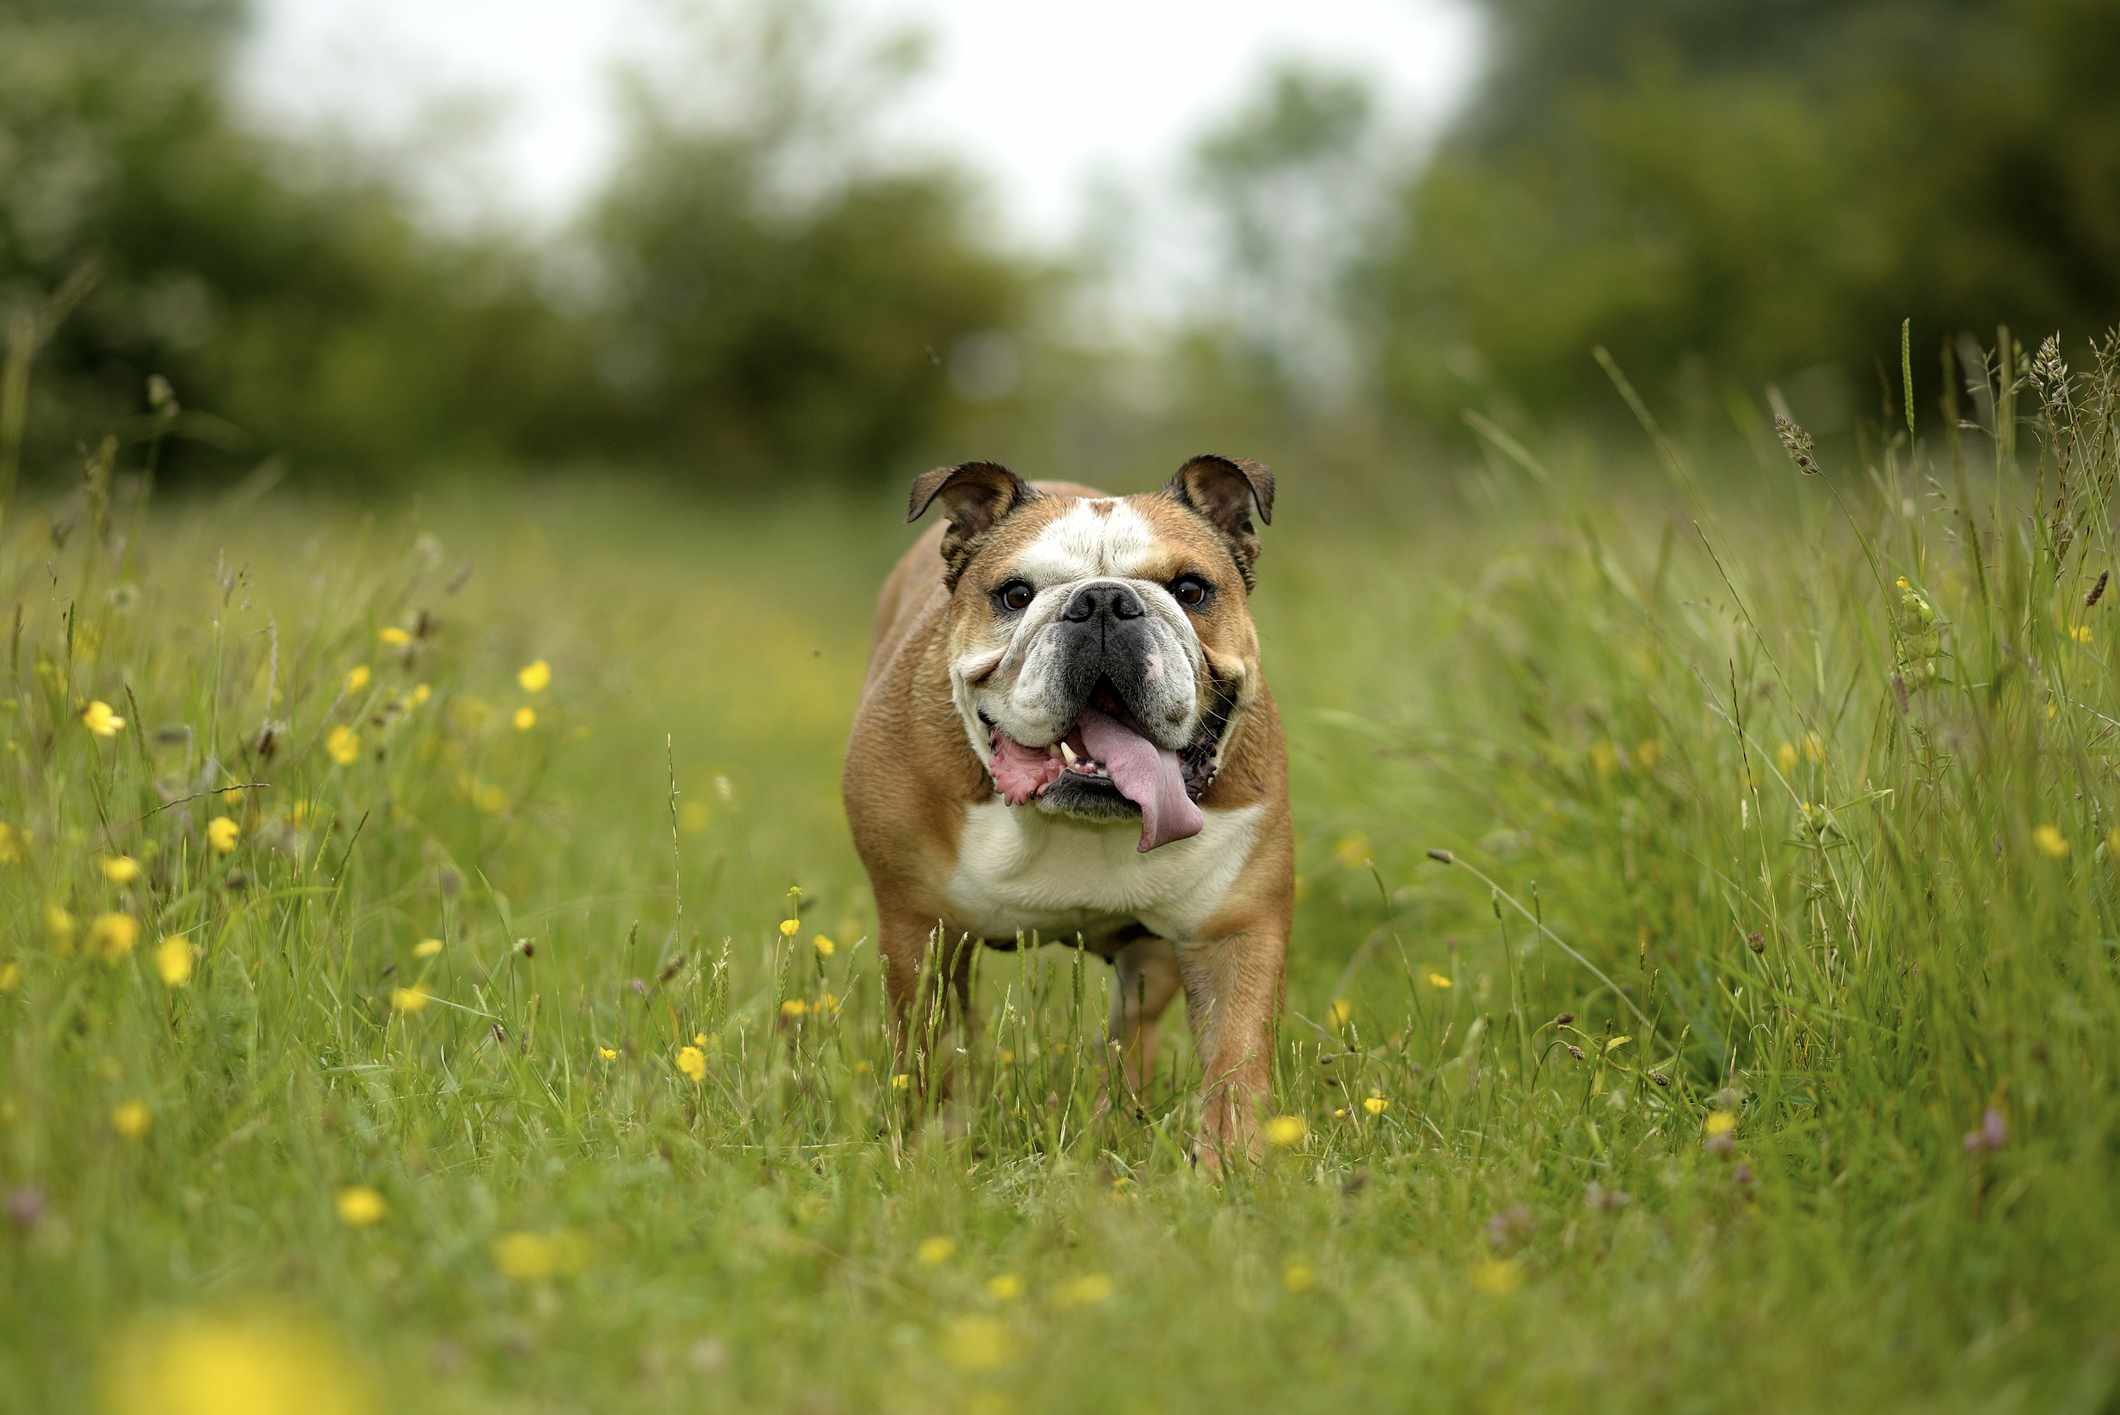 A tan and white English Bulldog standing in a field of wildflowers and long grass and looking at the camera with its mouth open.